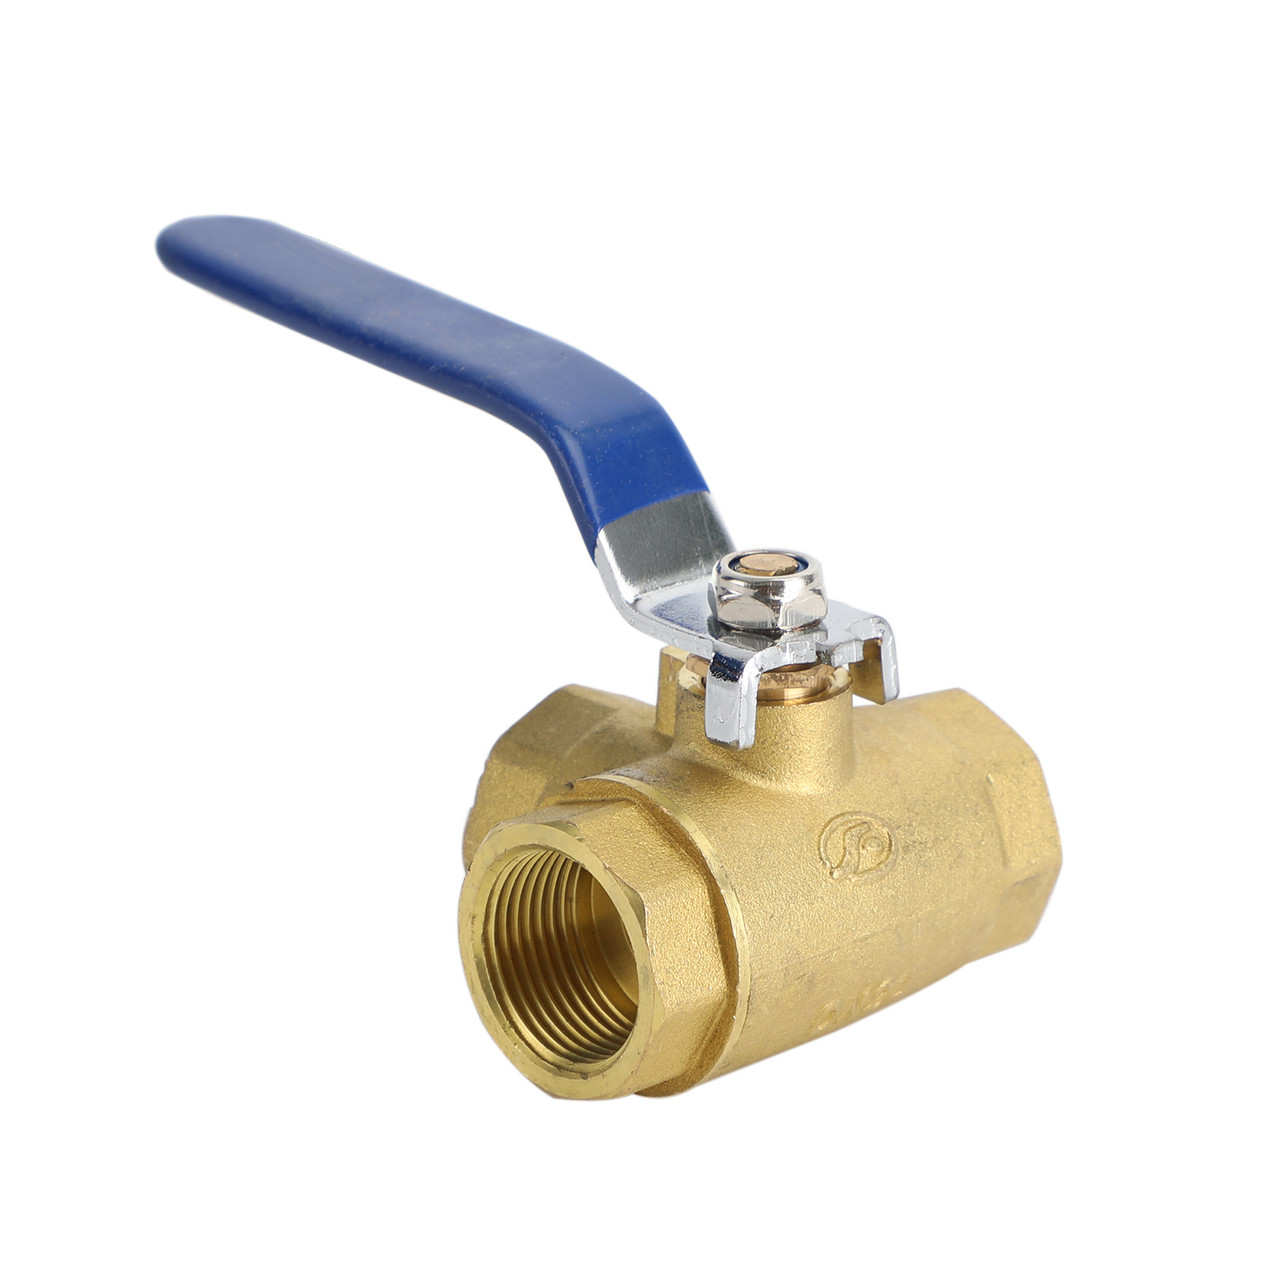 3/4" 3 Way Ball Valve Three T Port NPT Brass Female Type For Water Oil And Gas